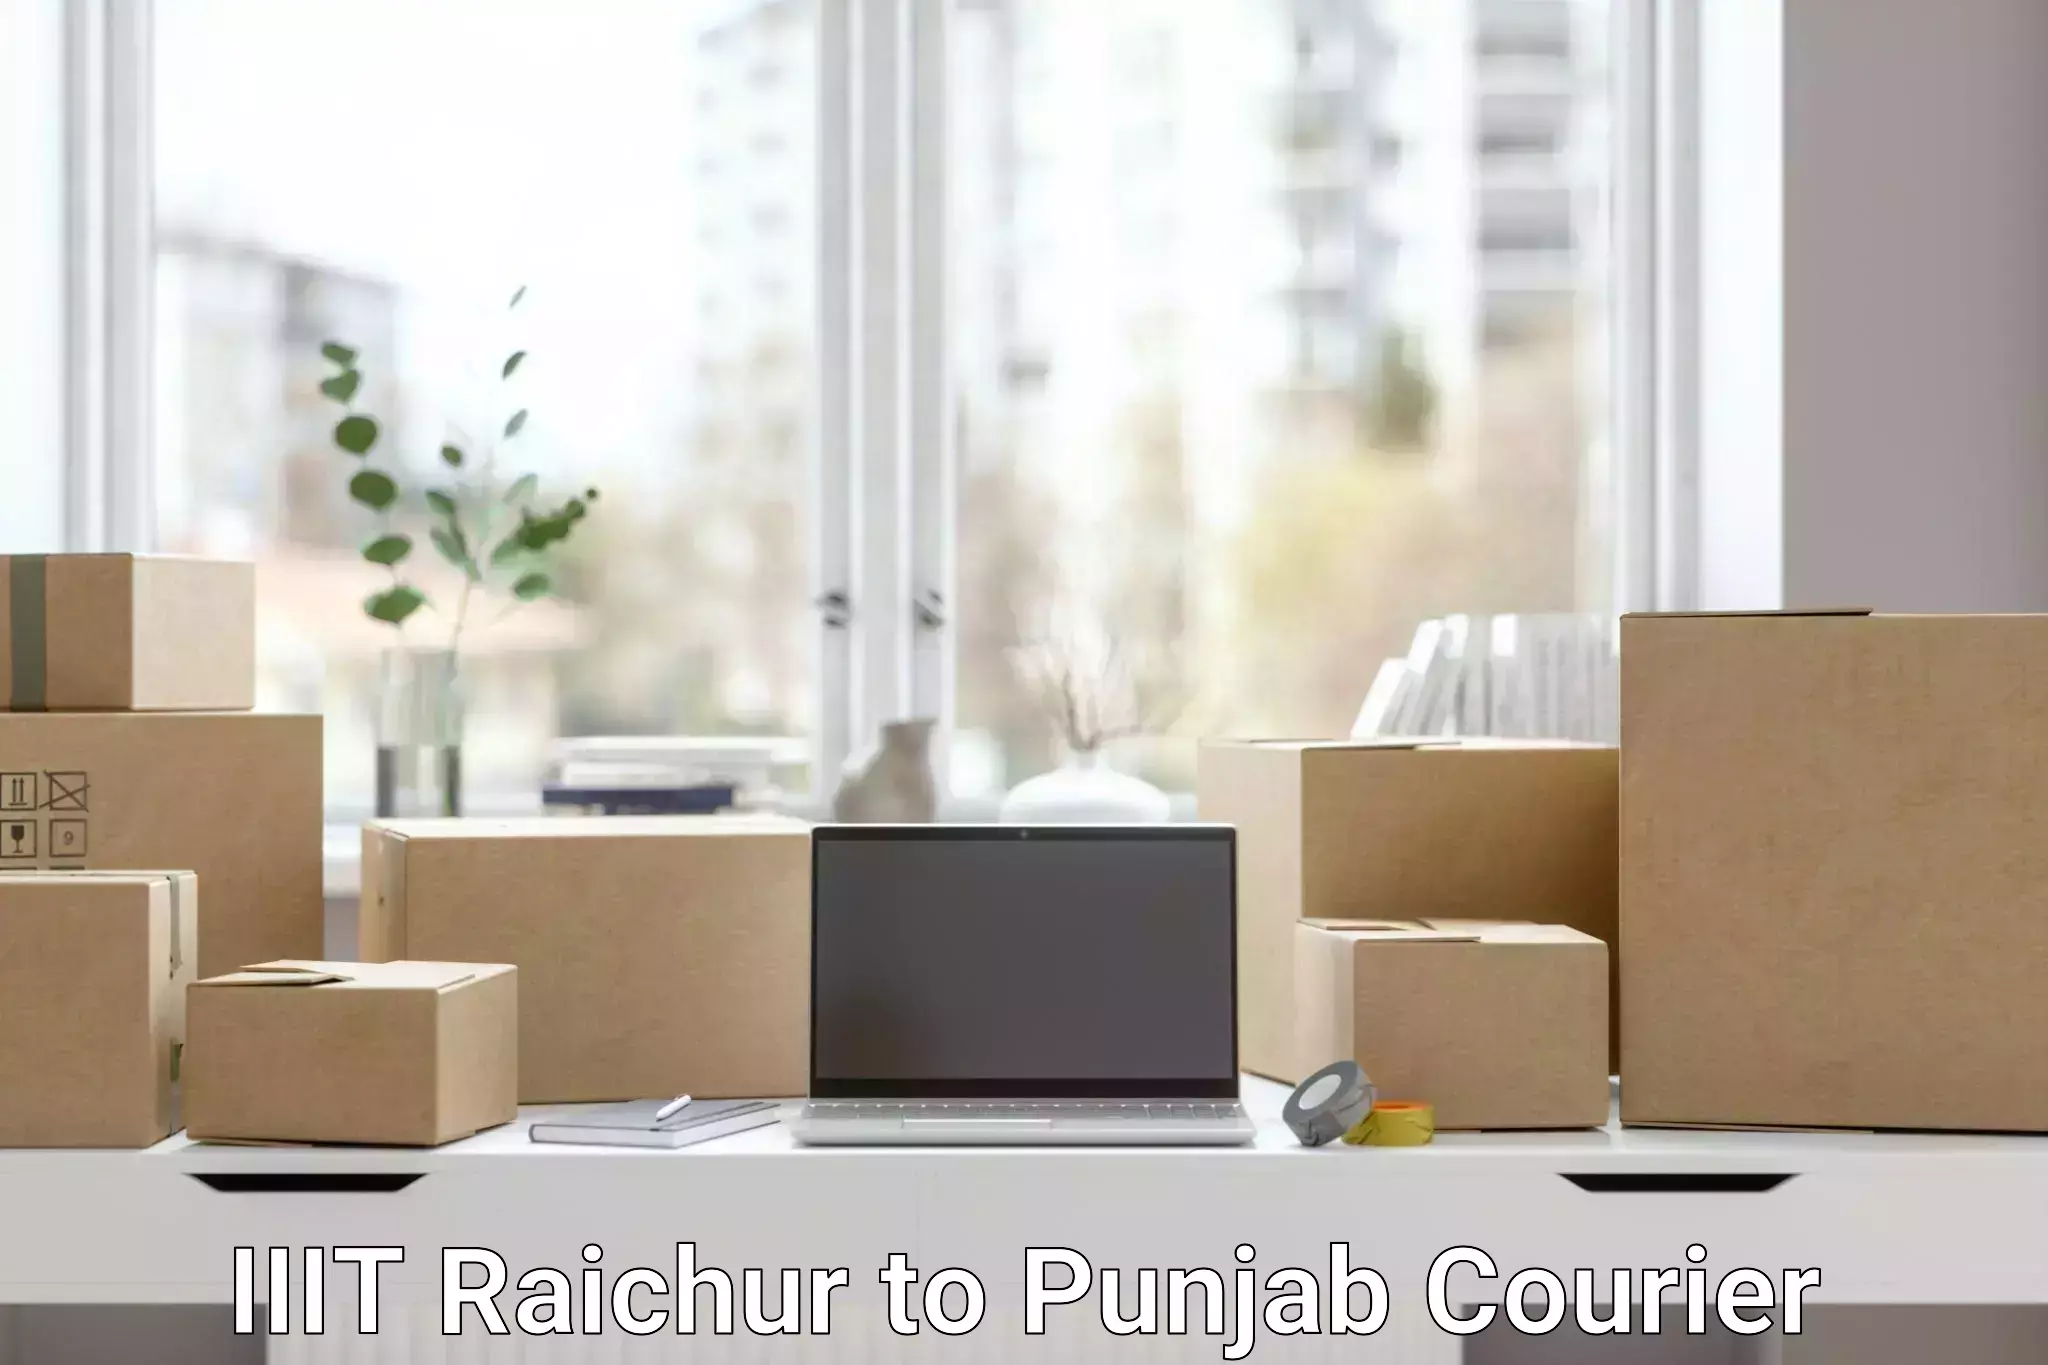 Enhanced delivery experience in IIIT Raichur to Punjab